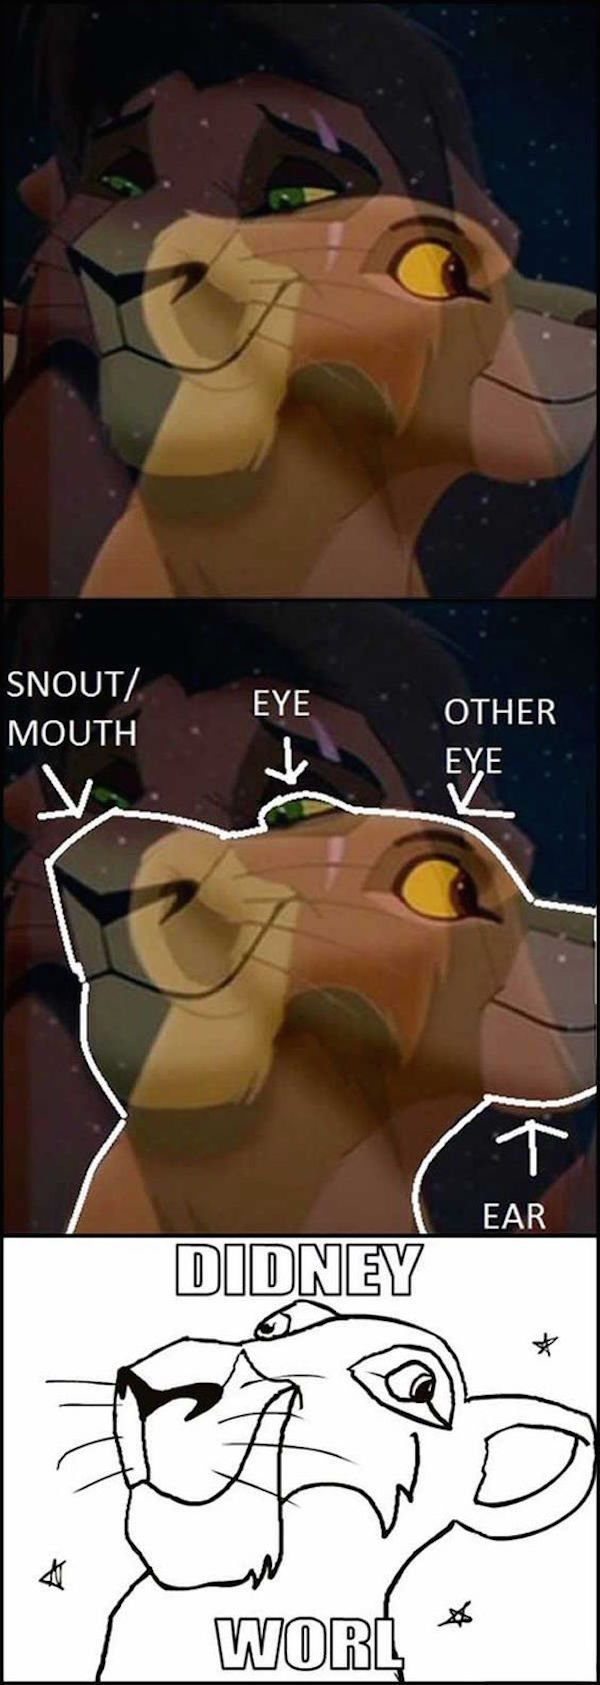 funny pic of the lion king can't unsee didney worl